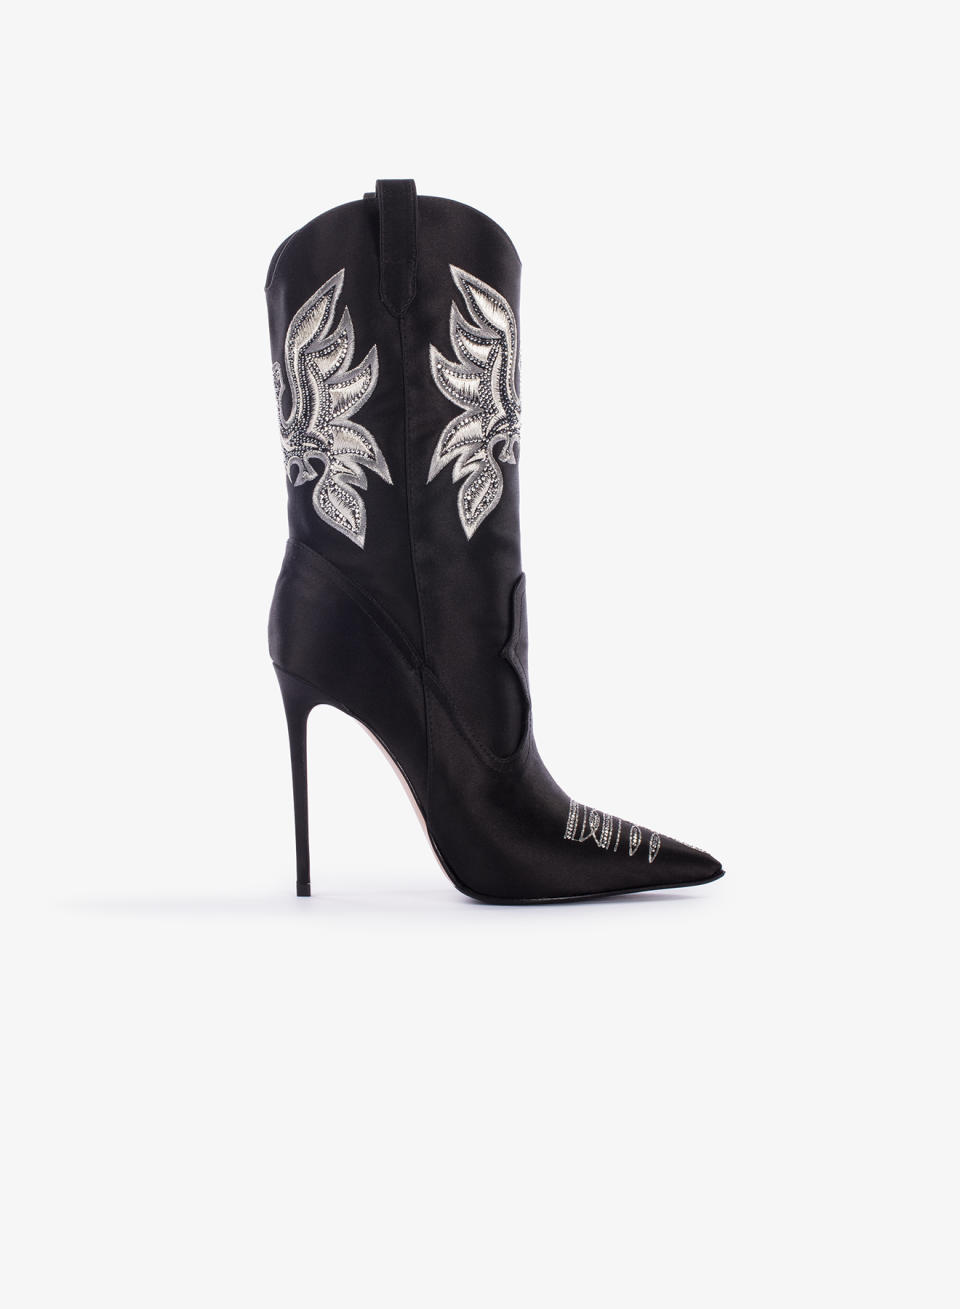 A Western inspired stiletto boot from Le Silla for fall winter ’23. - Credit: Courtesy of Le Silla